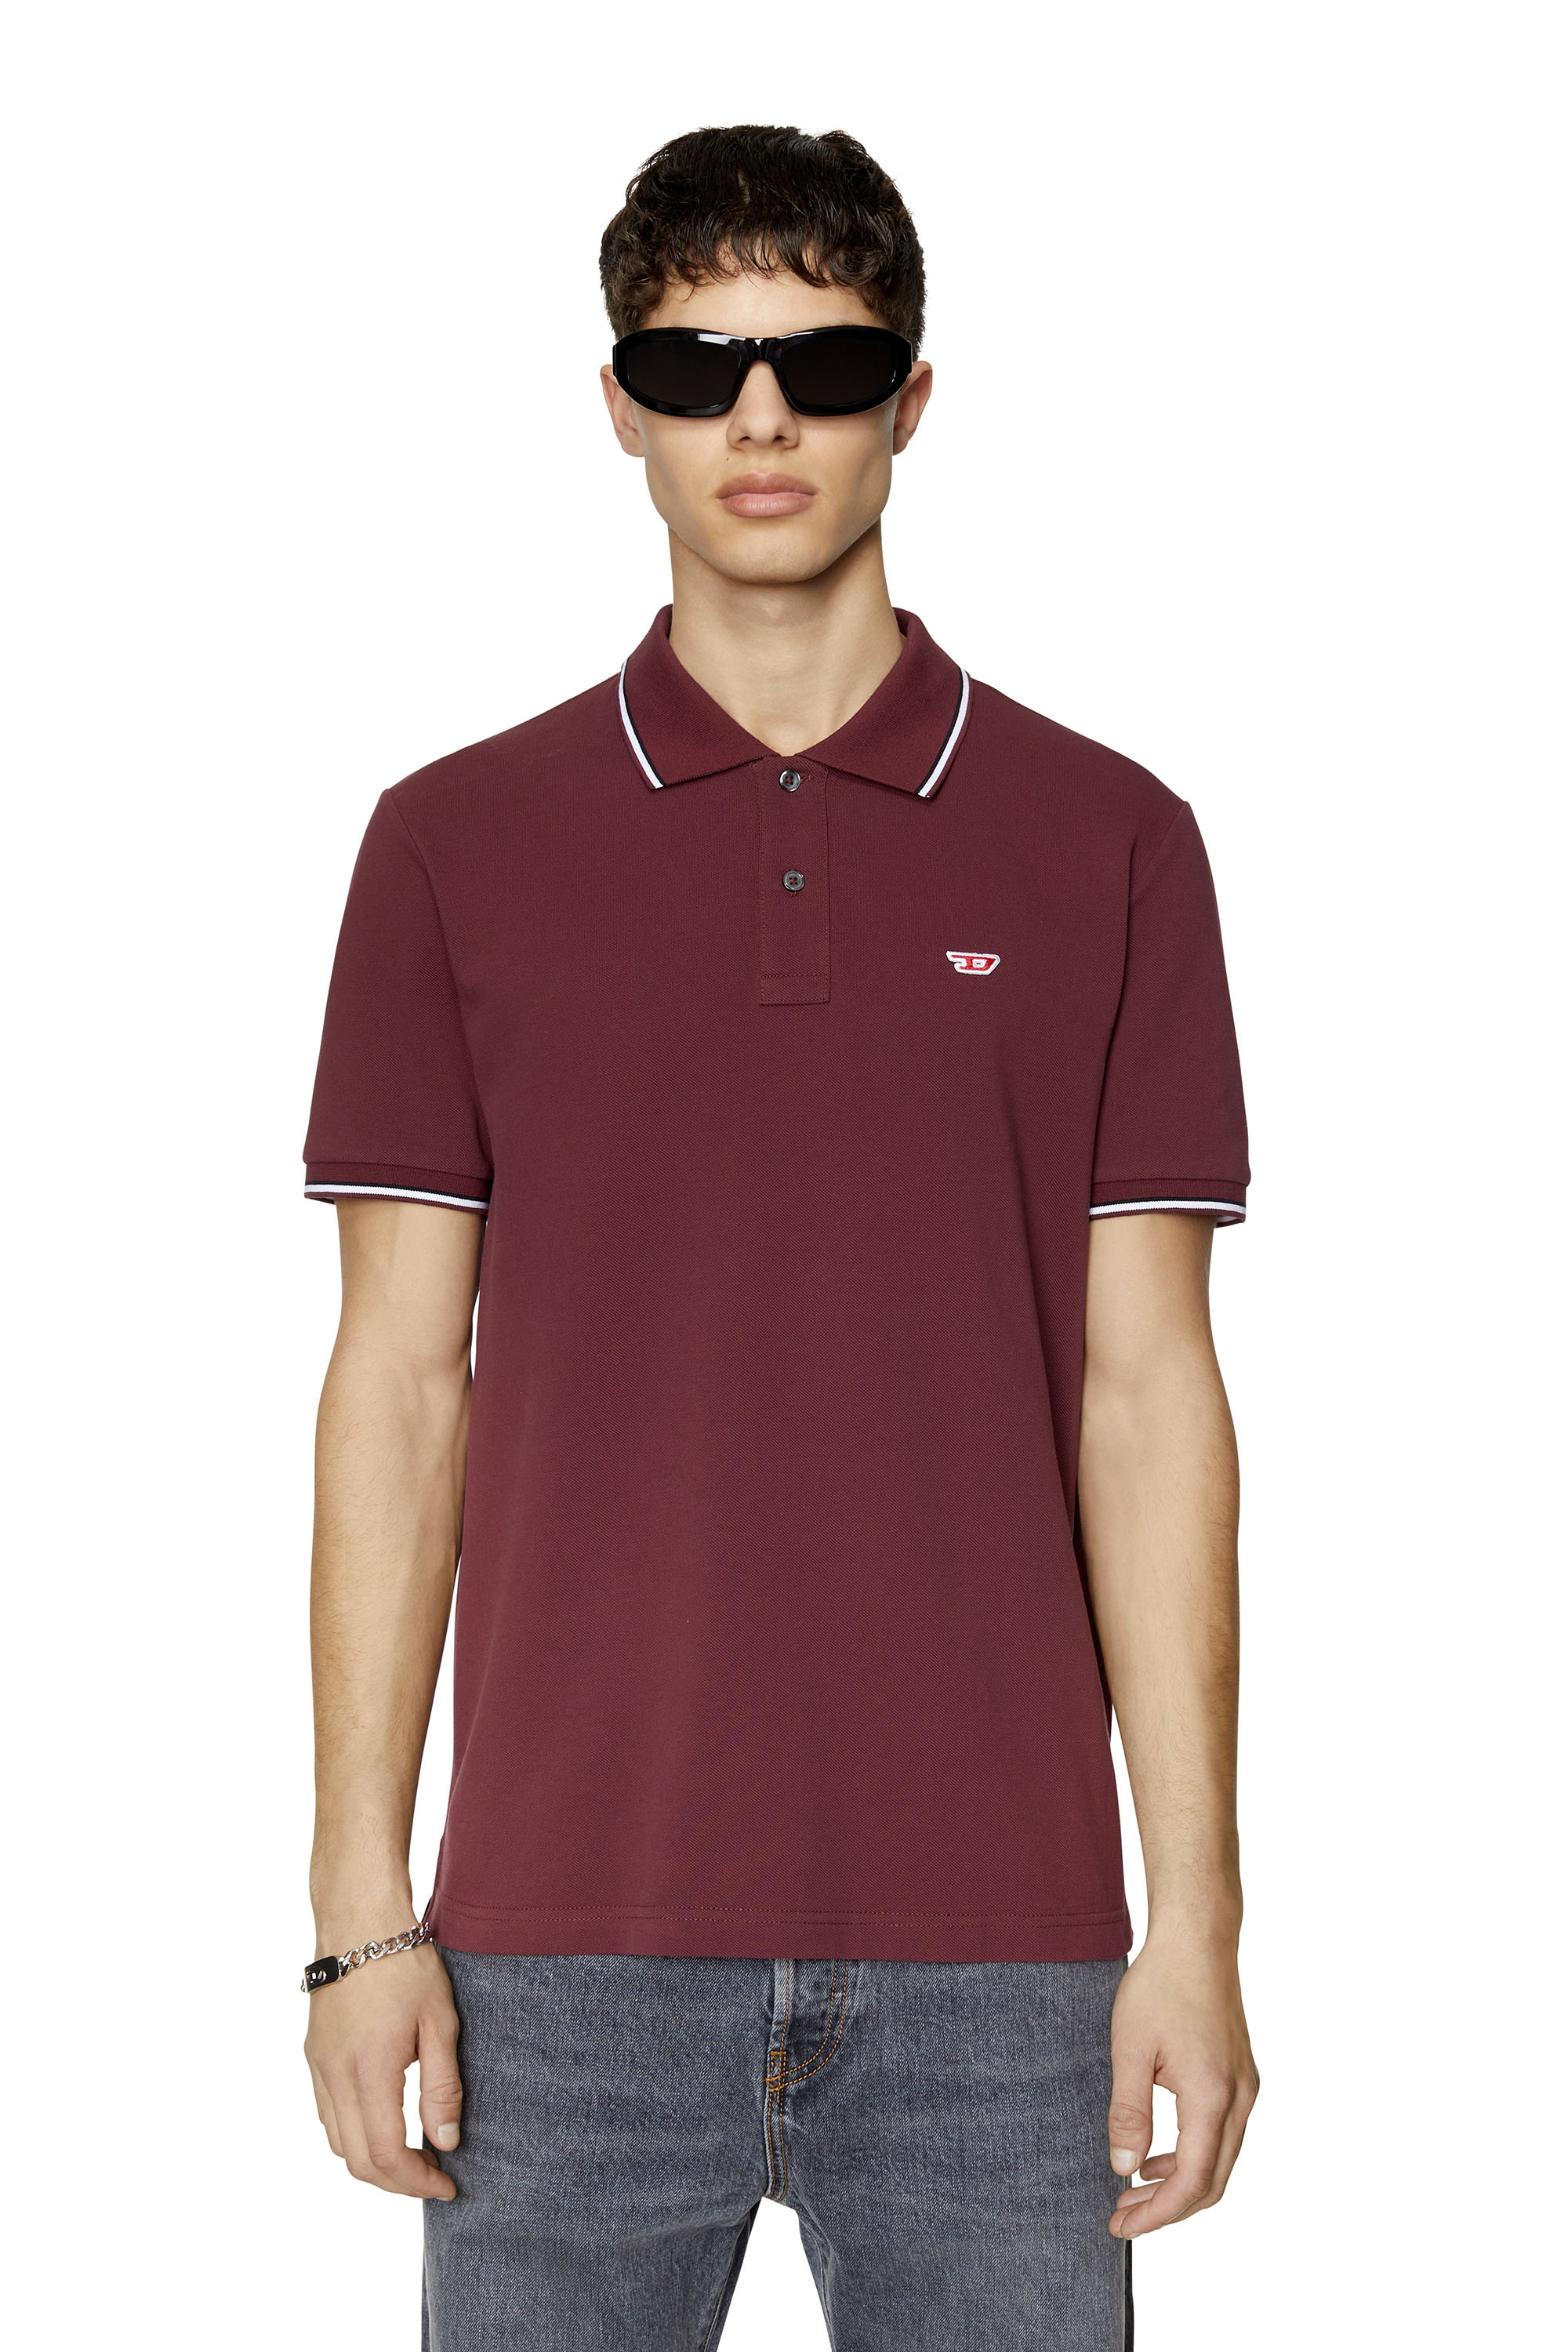 Diesel Polo Shirt With D Logo In Violet